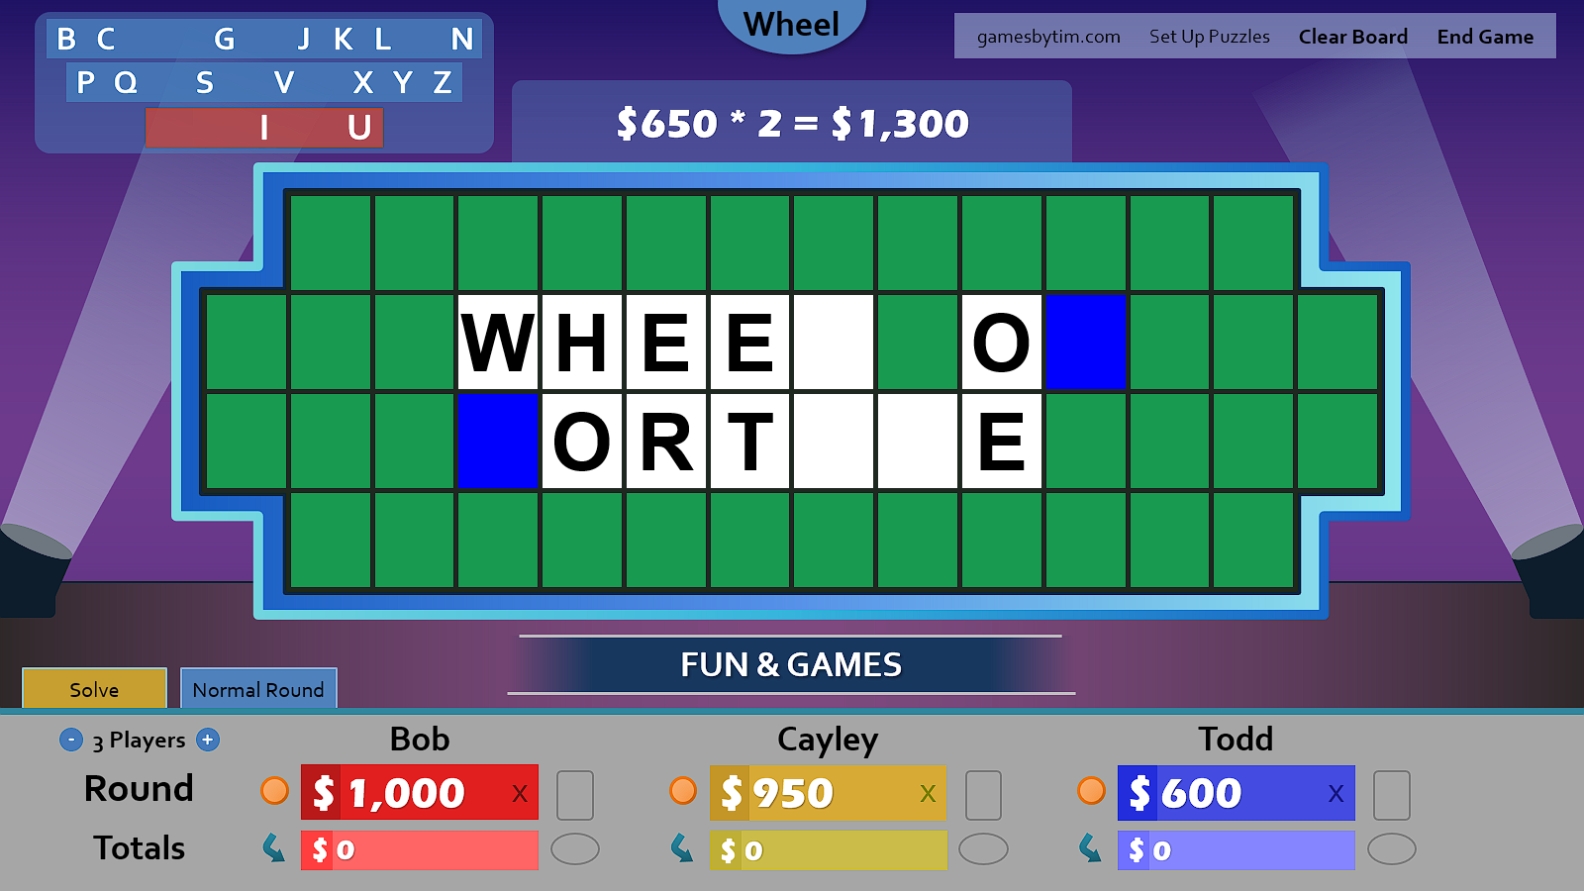 Wheel Of Fortune Powerpoint Game Show Templates intended for Wheel Of Fortune Powerpoint Template